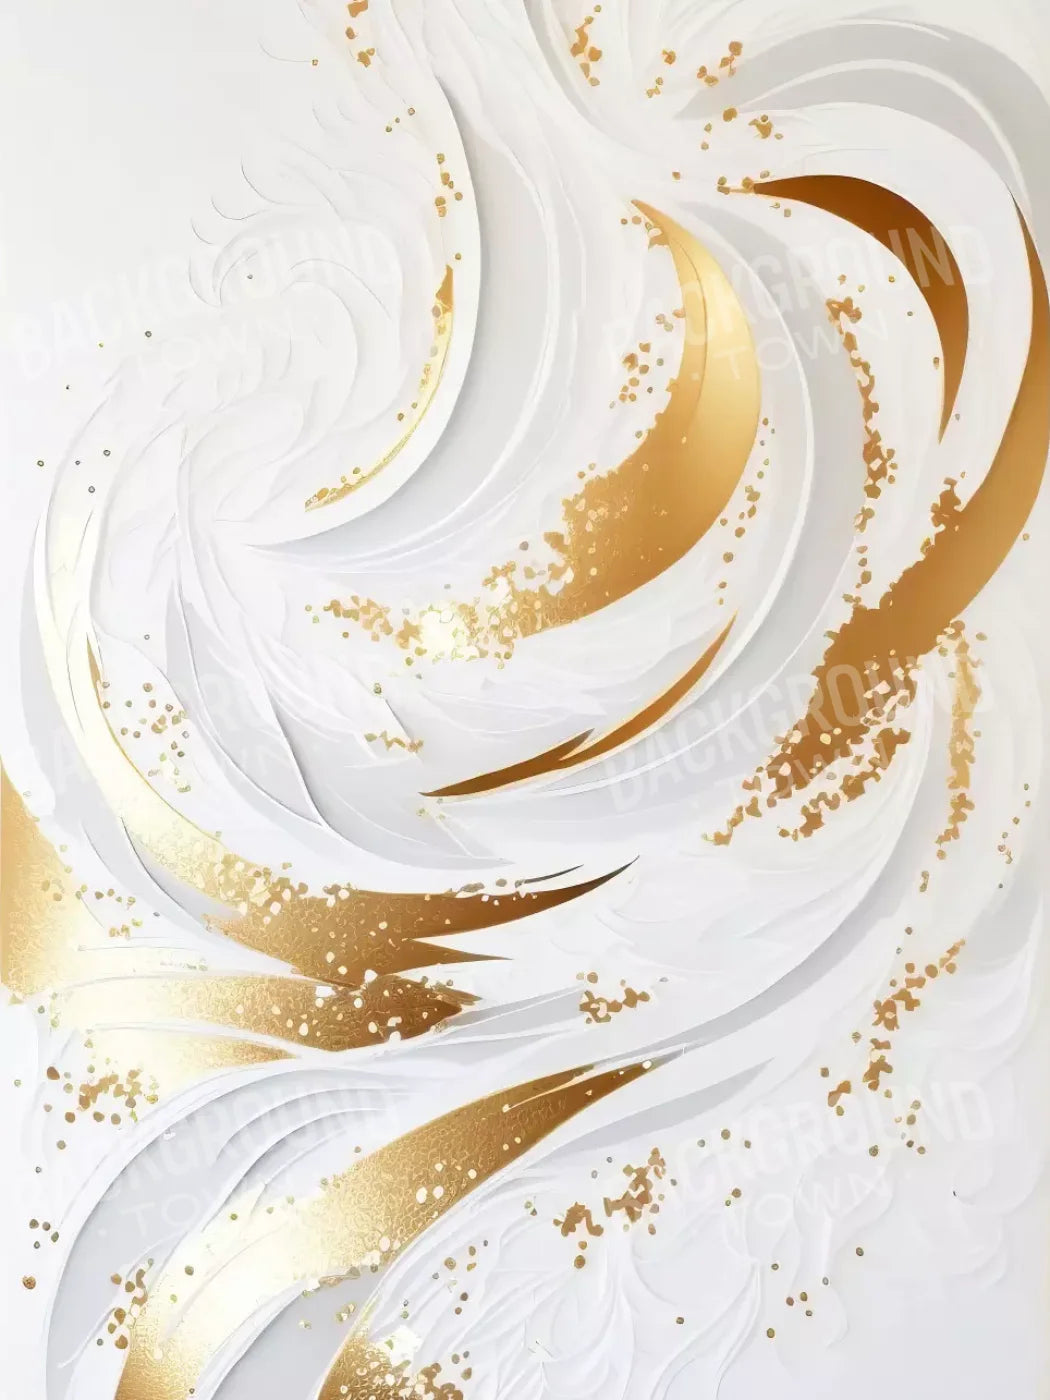 Abstract Swirl In White And Gold 8X10 Fleece ( 96 X 120 Inch ) Backdrop